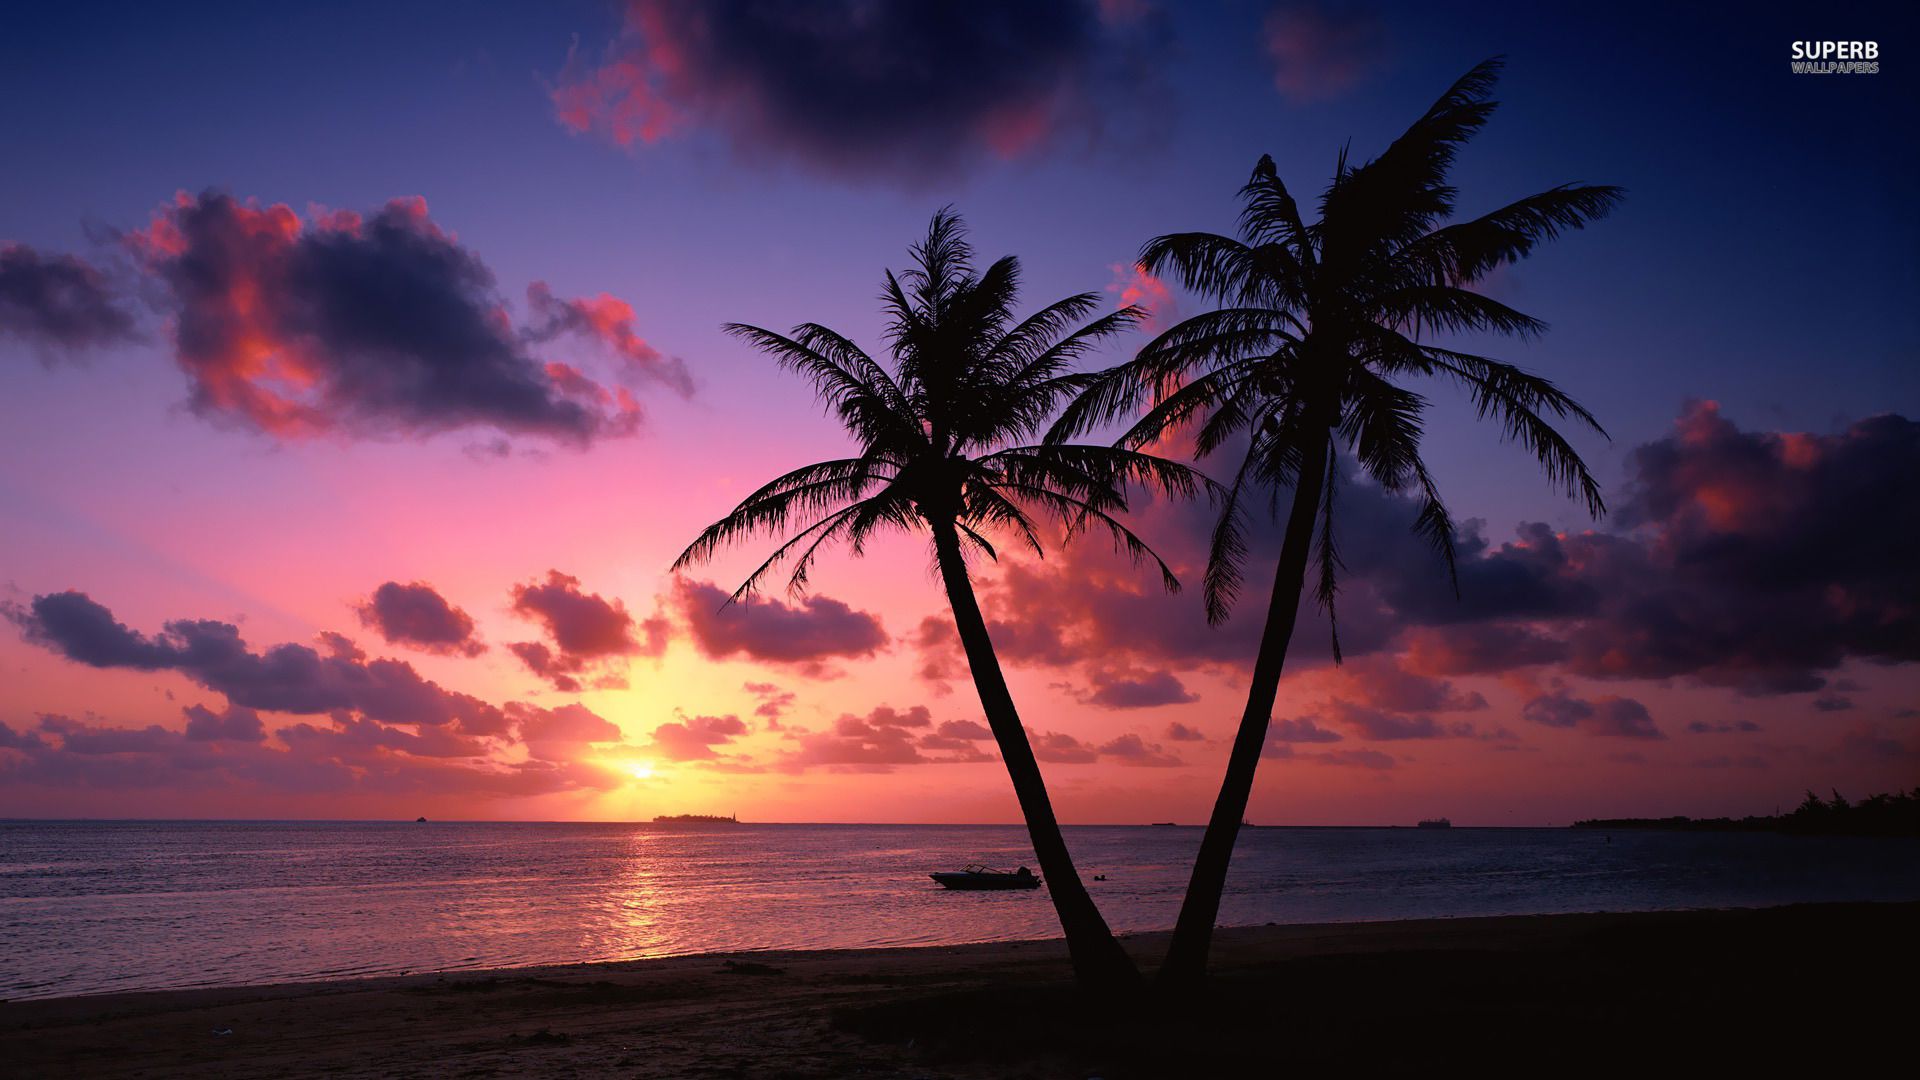 Colorful Beach Sunsets HD Image & Picture. Beach sunset wallpaper, Sunset image, Sunset wallpaper